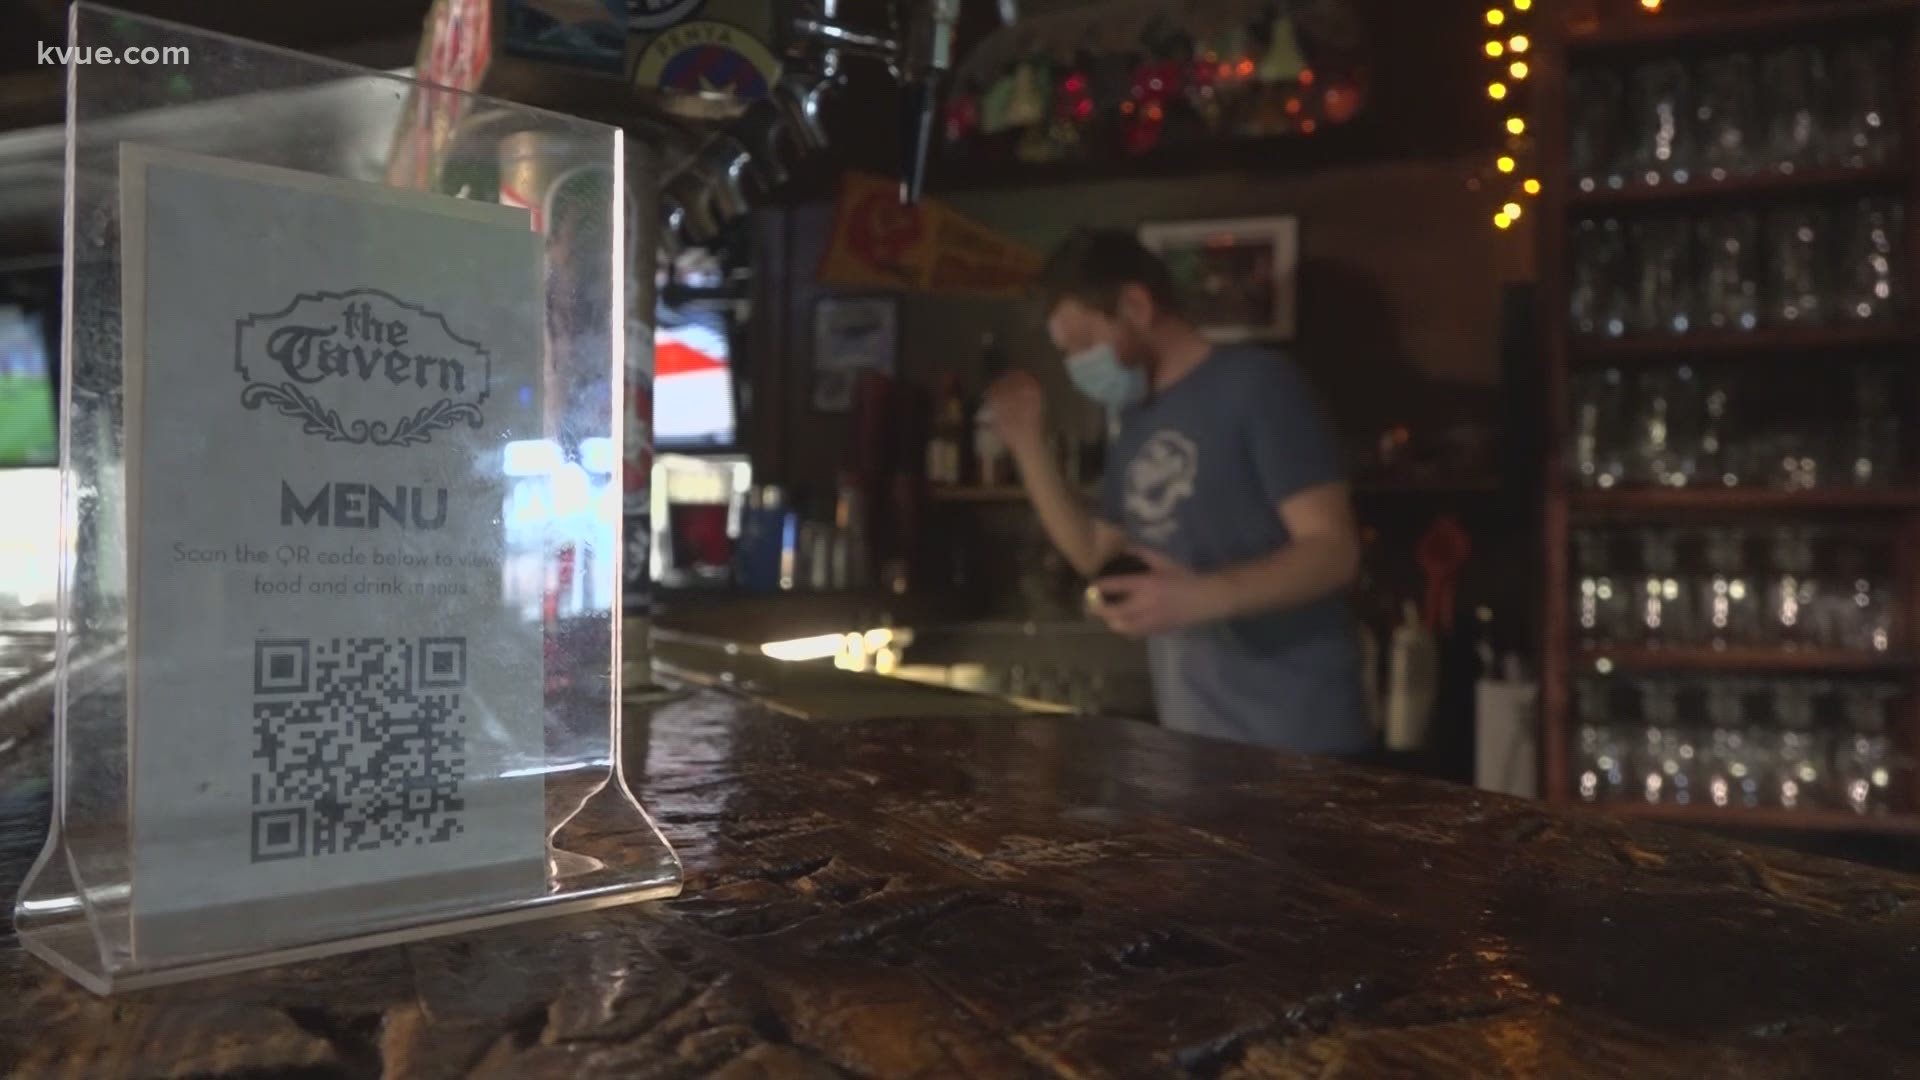 There are new curfew restrictions for Austin bars and restaurants over New Year's weekend to help stop the spread of coronavirus.